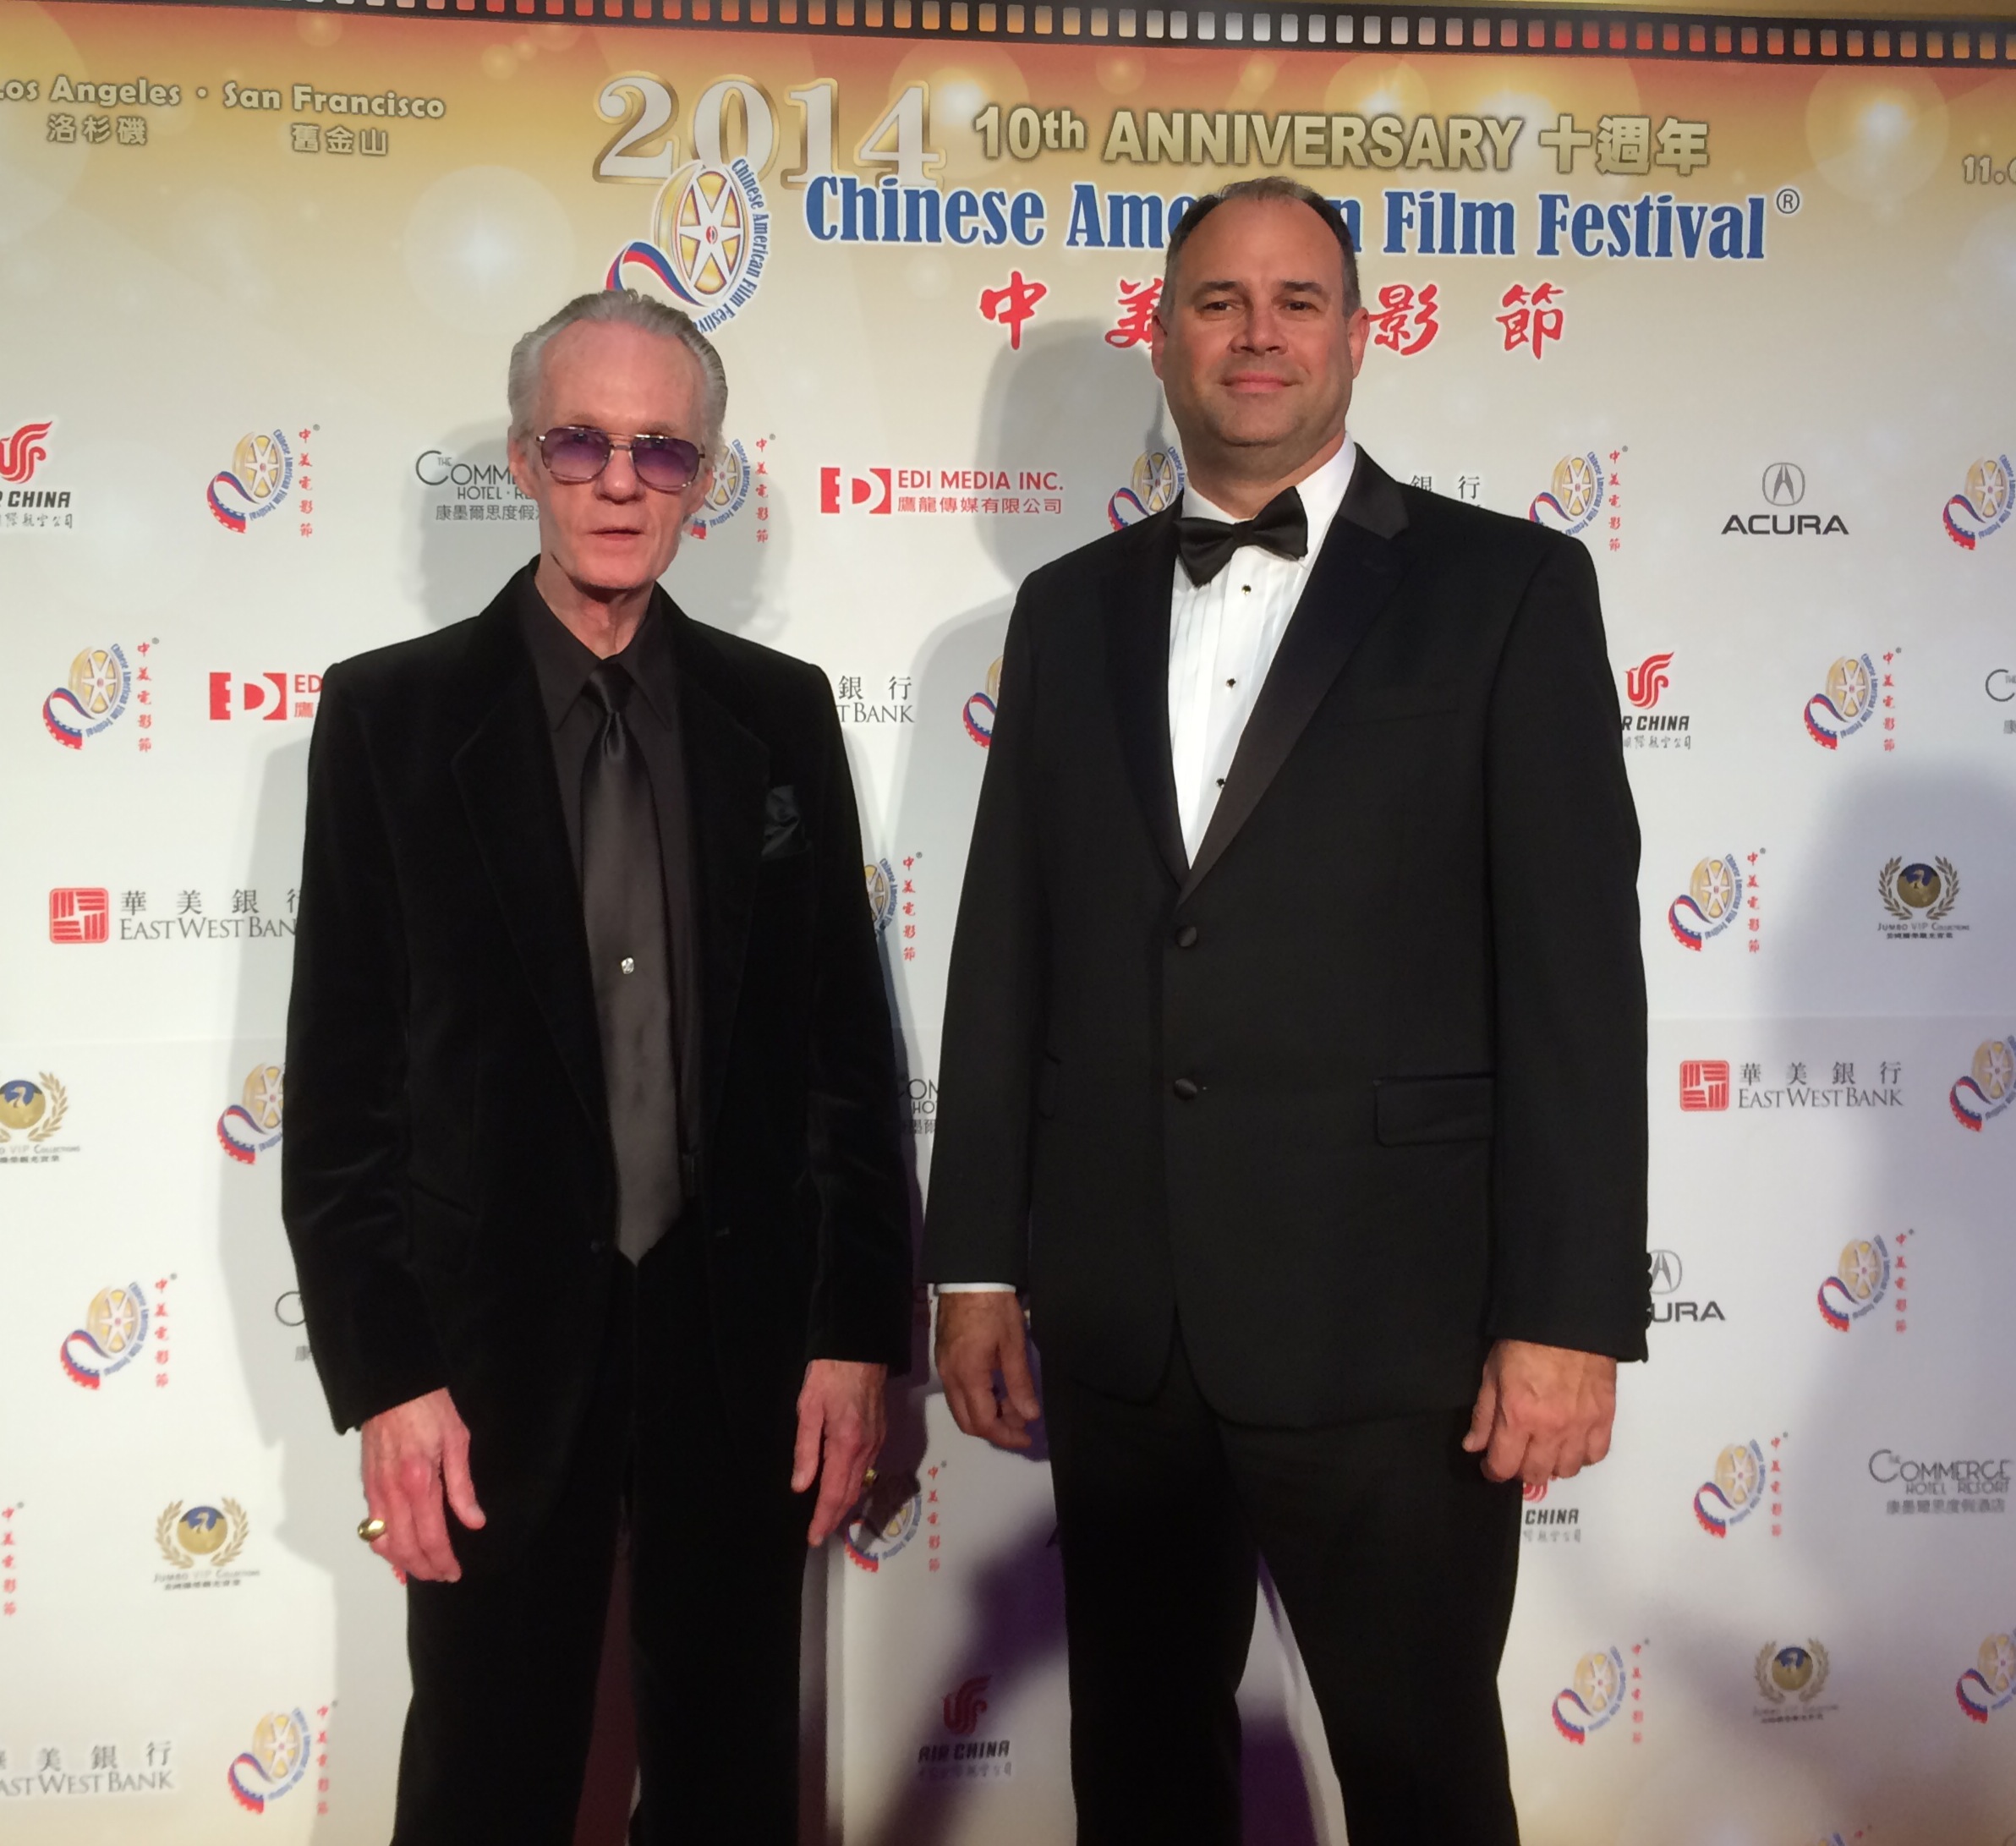 The Chinese American Film Festival - 2014